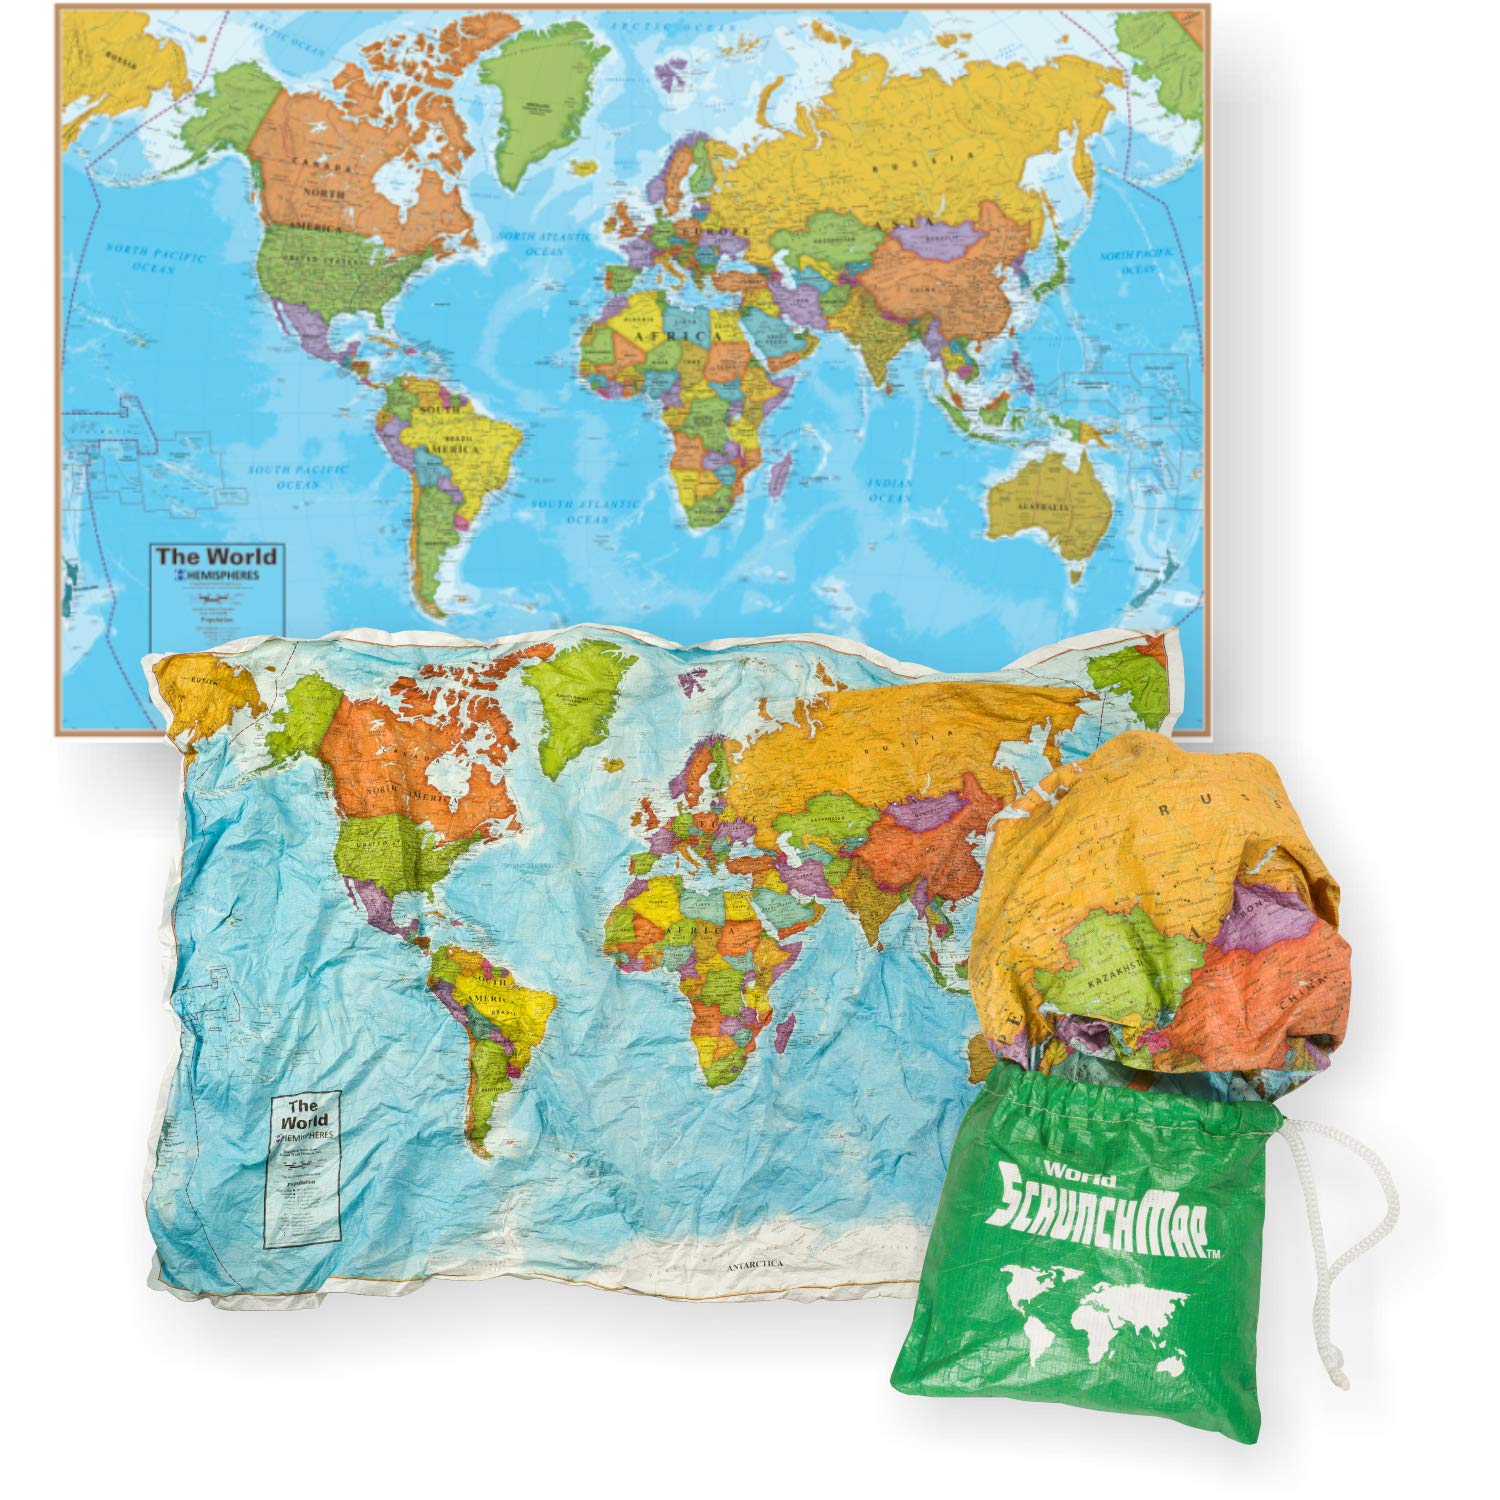 Waypoint Geographic World ScrunchMap - Up-to-Date & Easy to Store Scrunch Design with Storage Bag (24